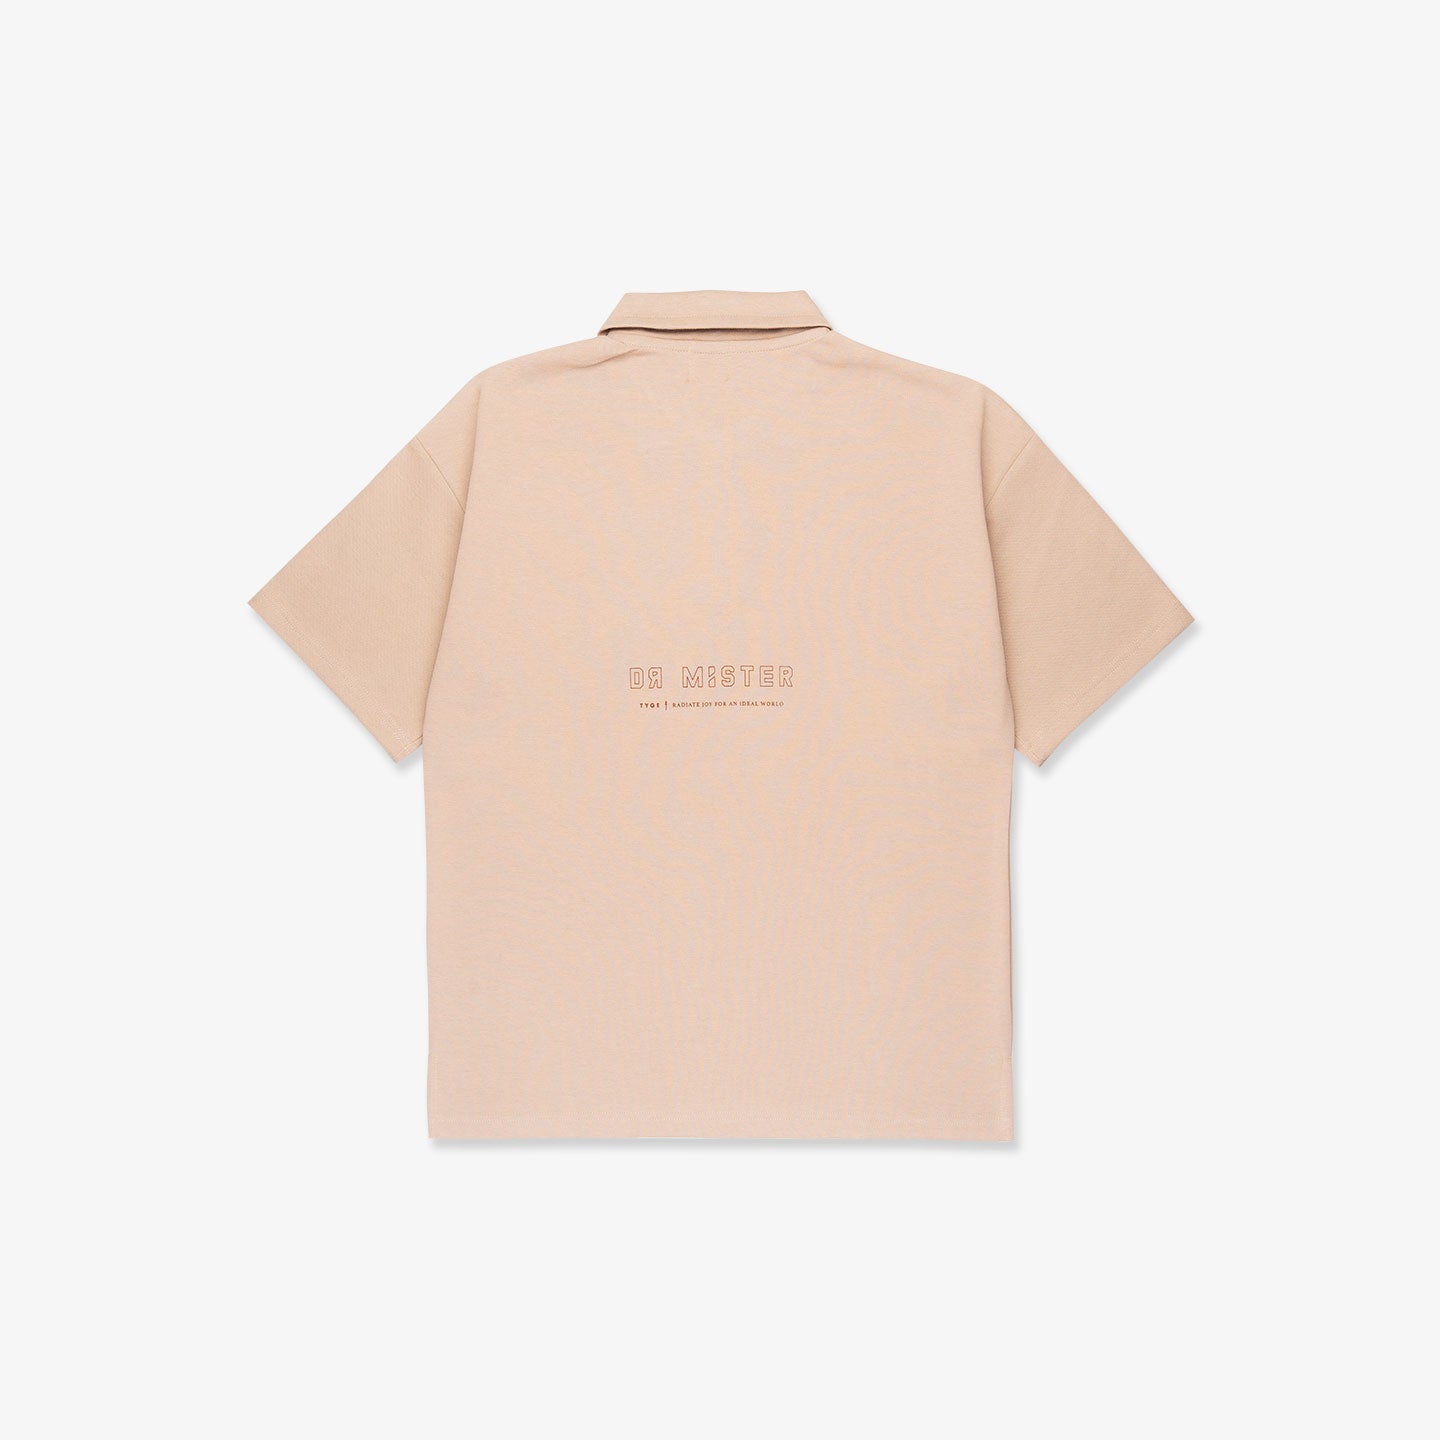 Patched Polo Tee - Beige